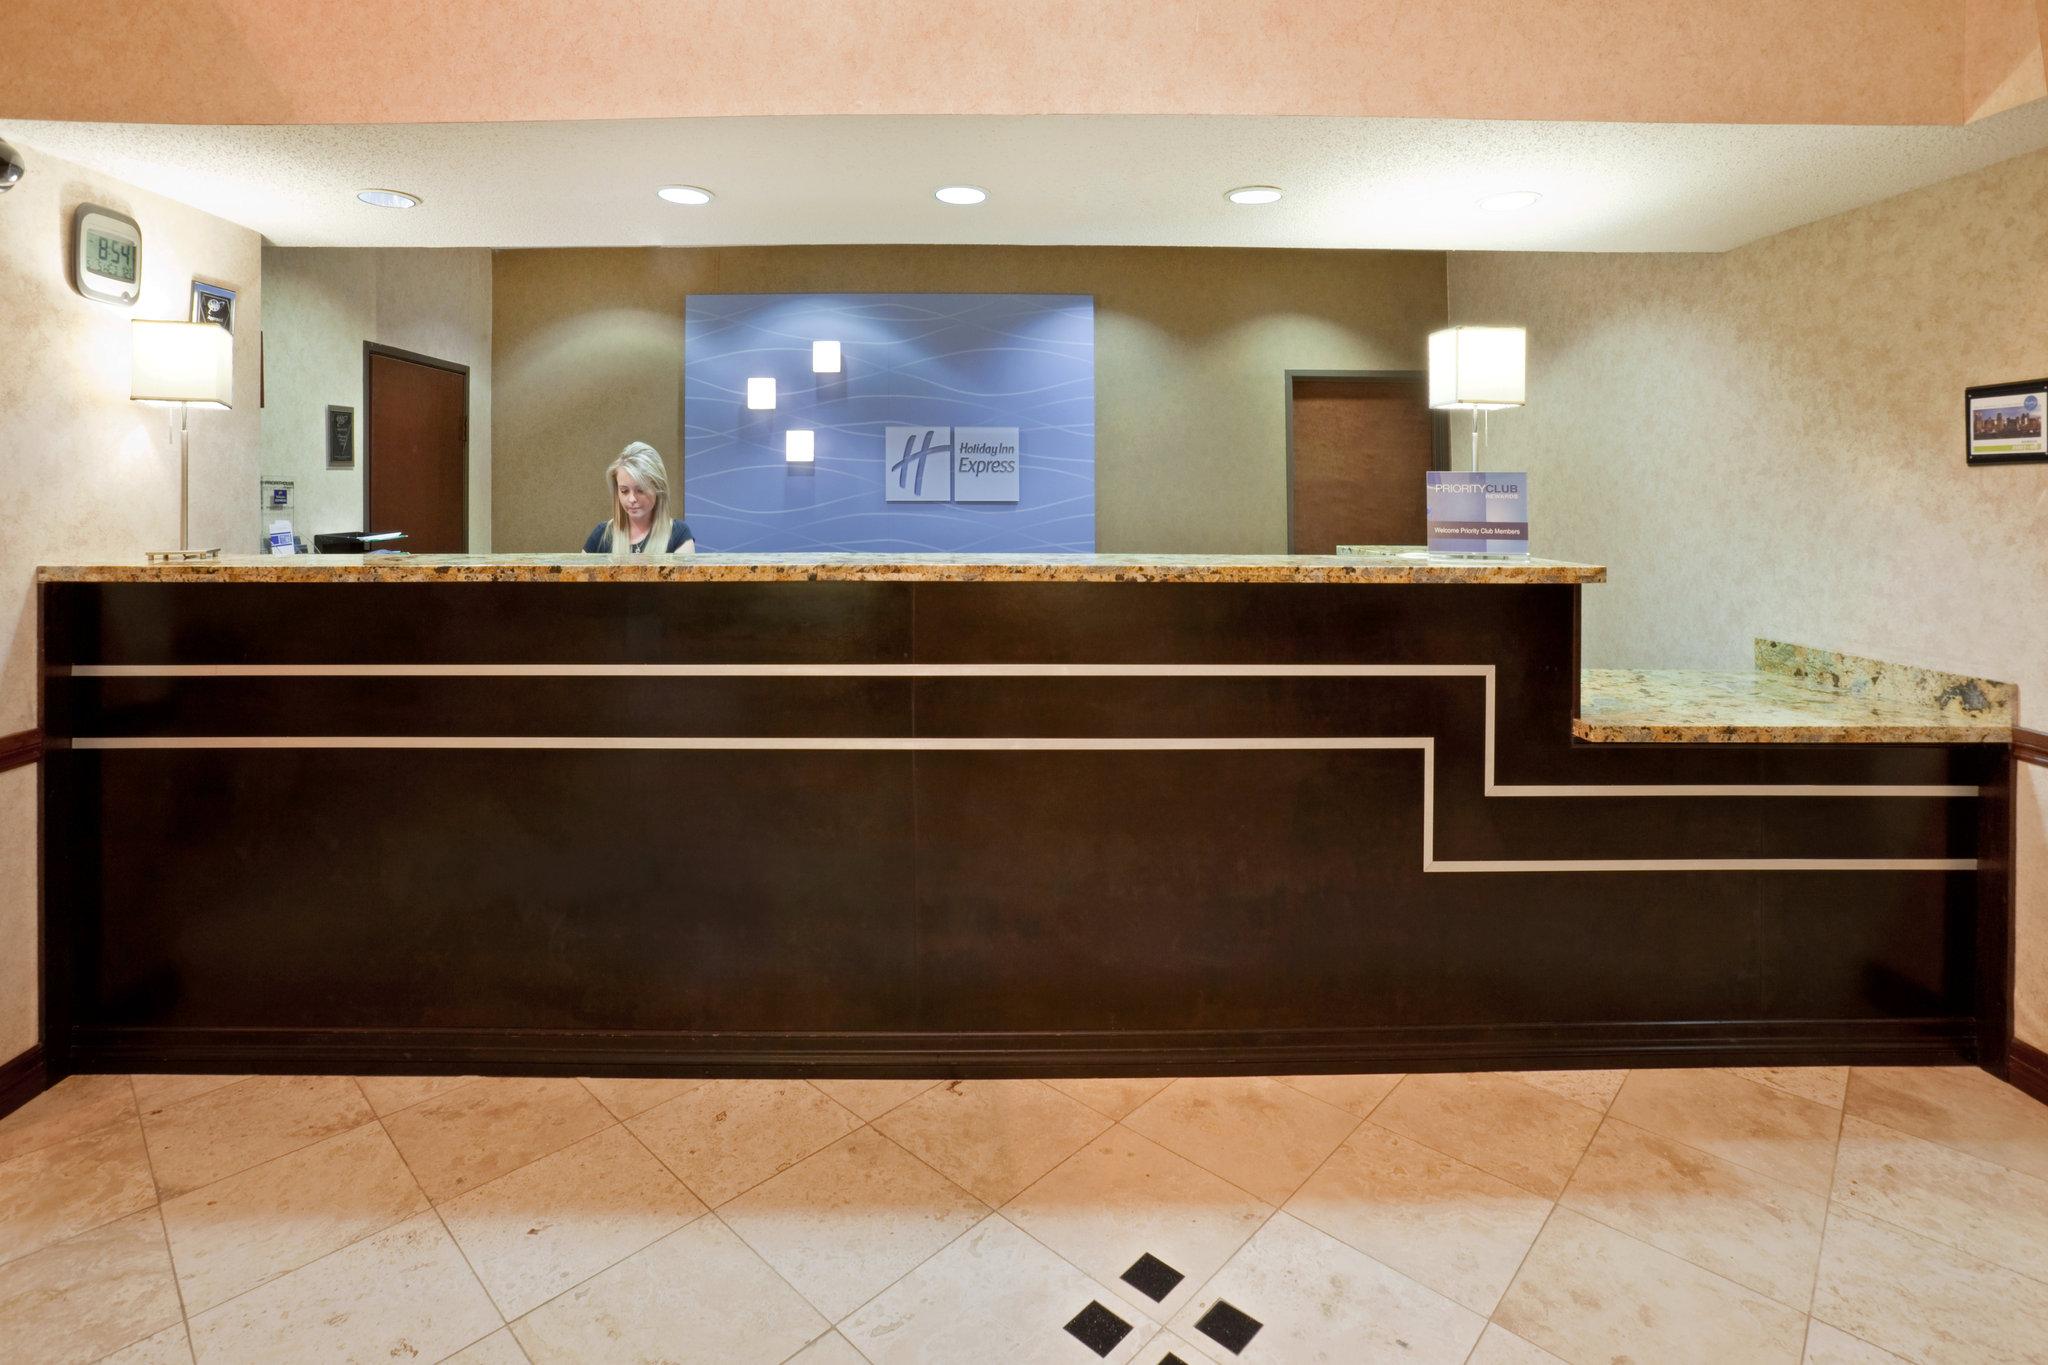 Holiday Inn Express & Suites Dallas Park Central Northeast